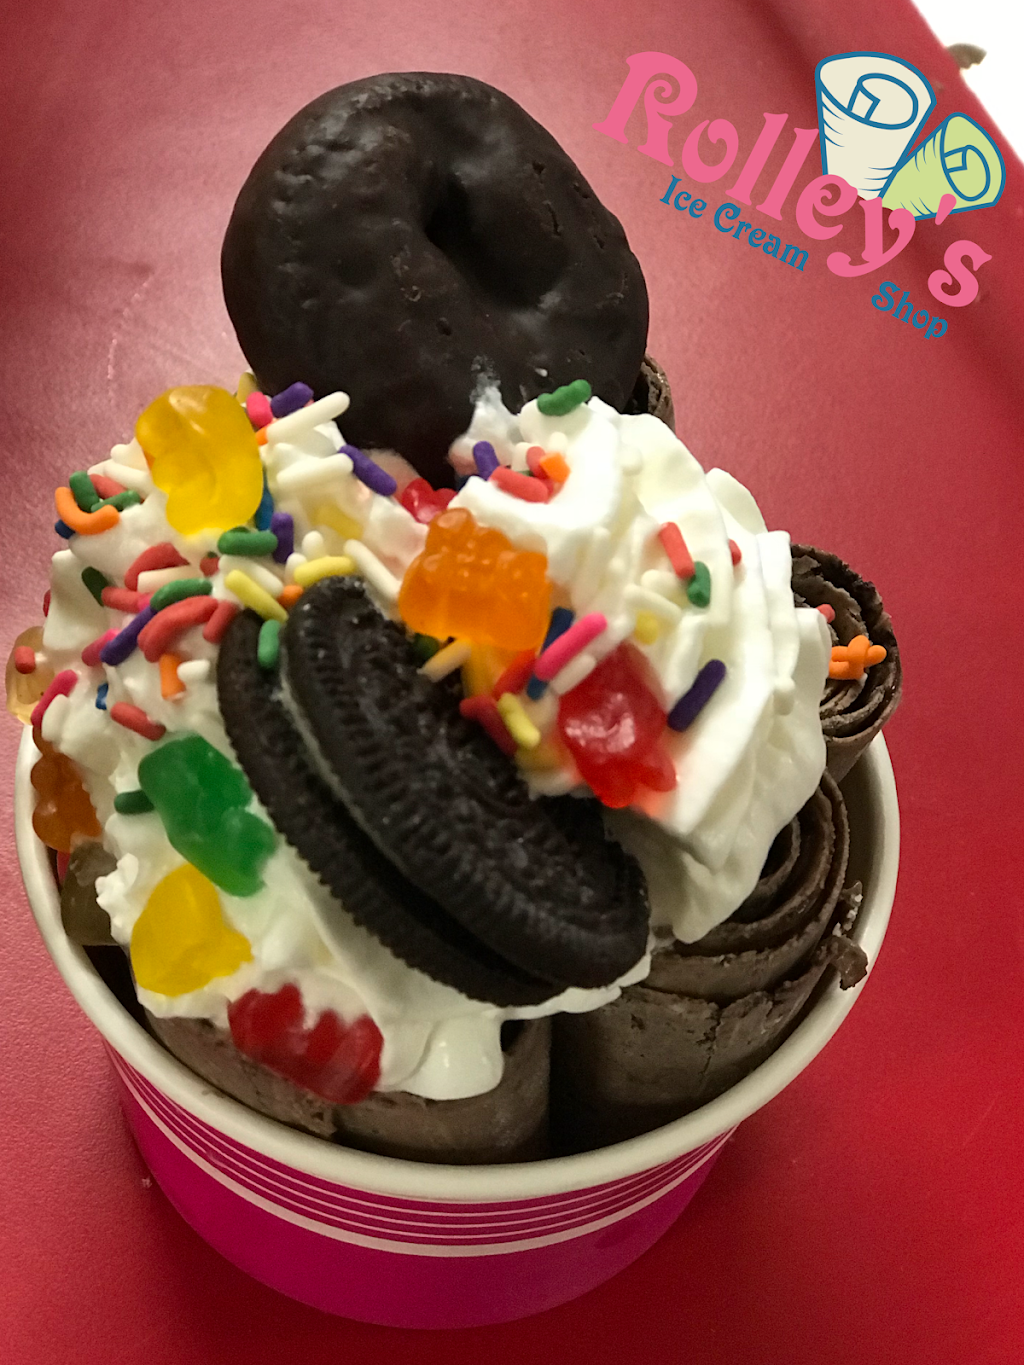 Rolleys Ice Cream Shop | The Shoppes at American Candle, 3414 PA-611, inside, PA 18321, United States | Phone: (570) 629-3388